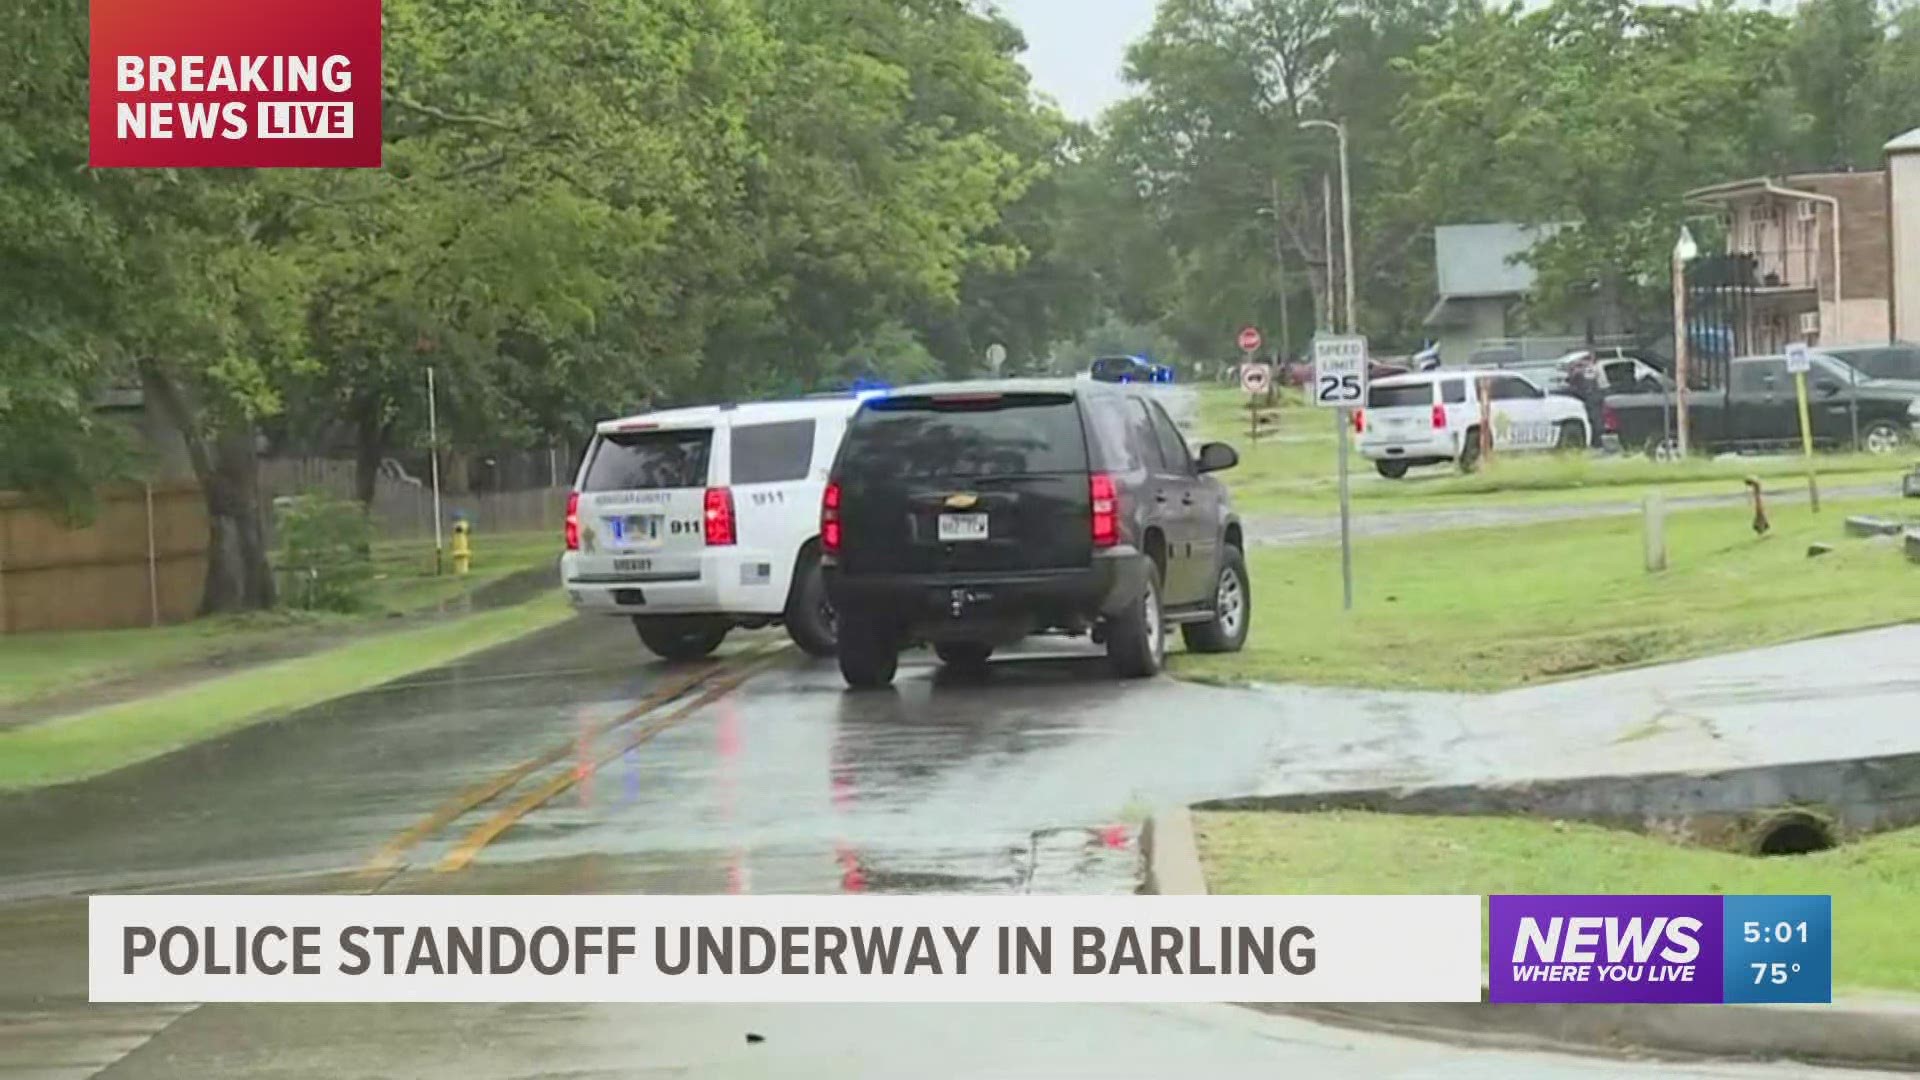 Authorities in Barling have their guns drawn after a subject barricaded himself inside a home near Big A's convenience store.